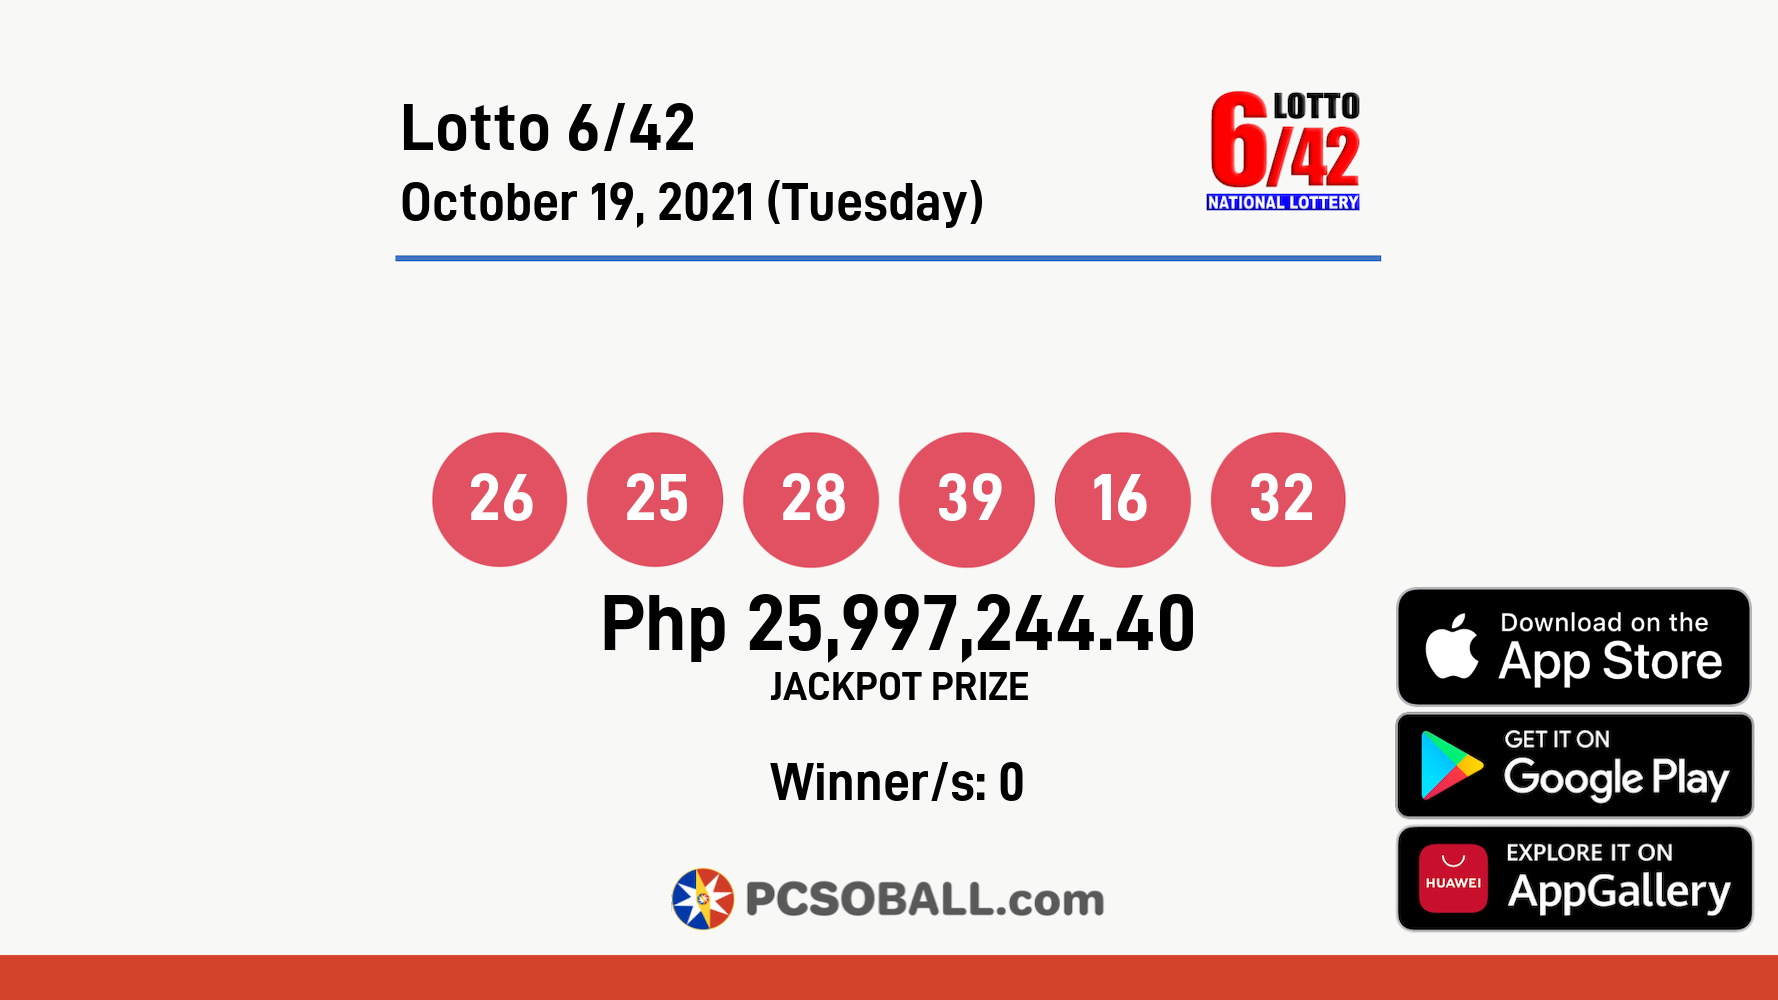 Lotto 6/42 October 19, 2021 (Tuesday) Result